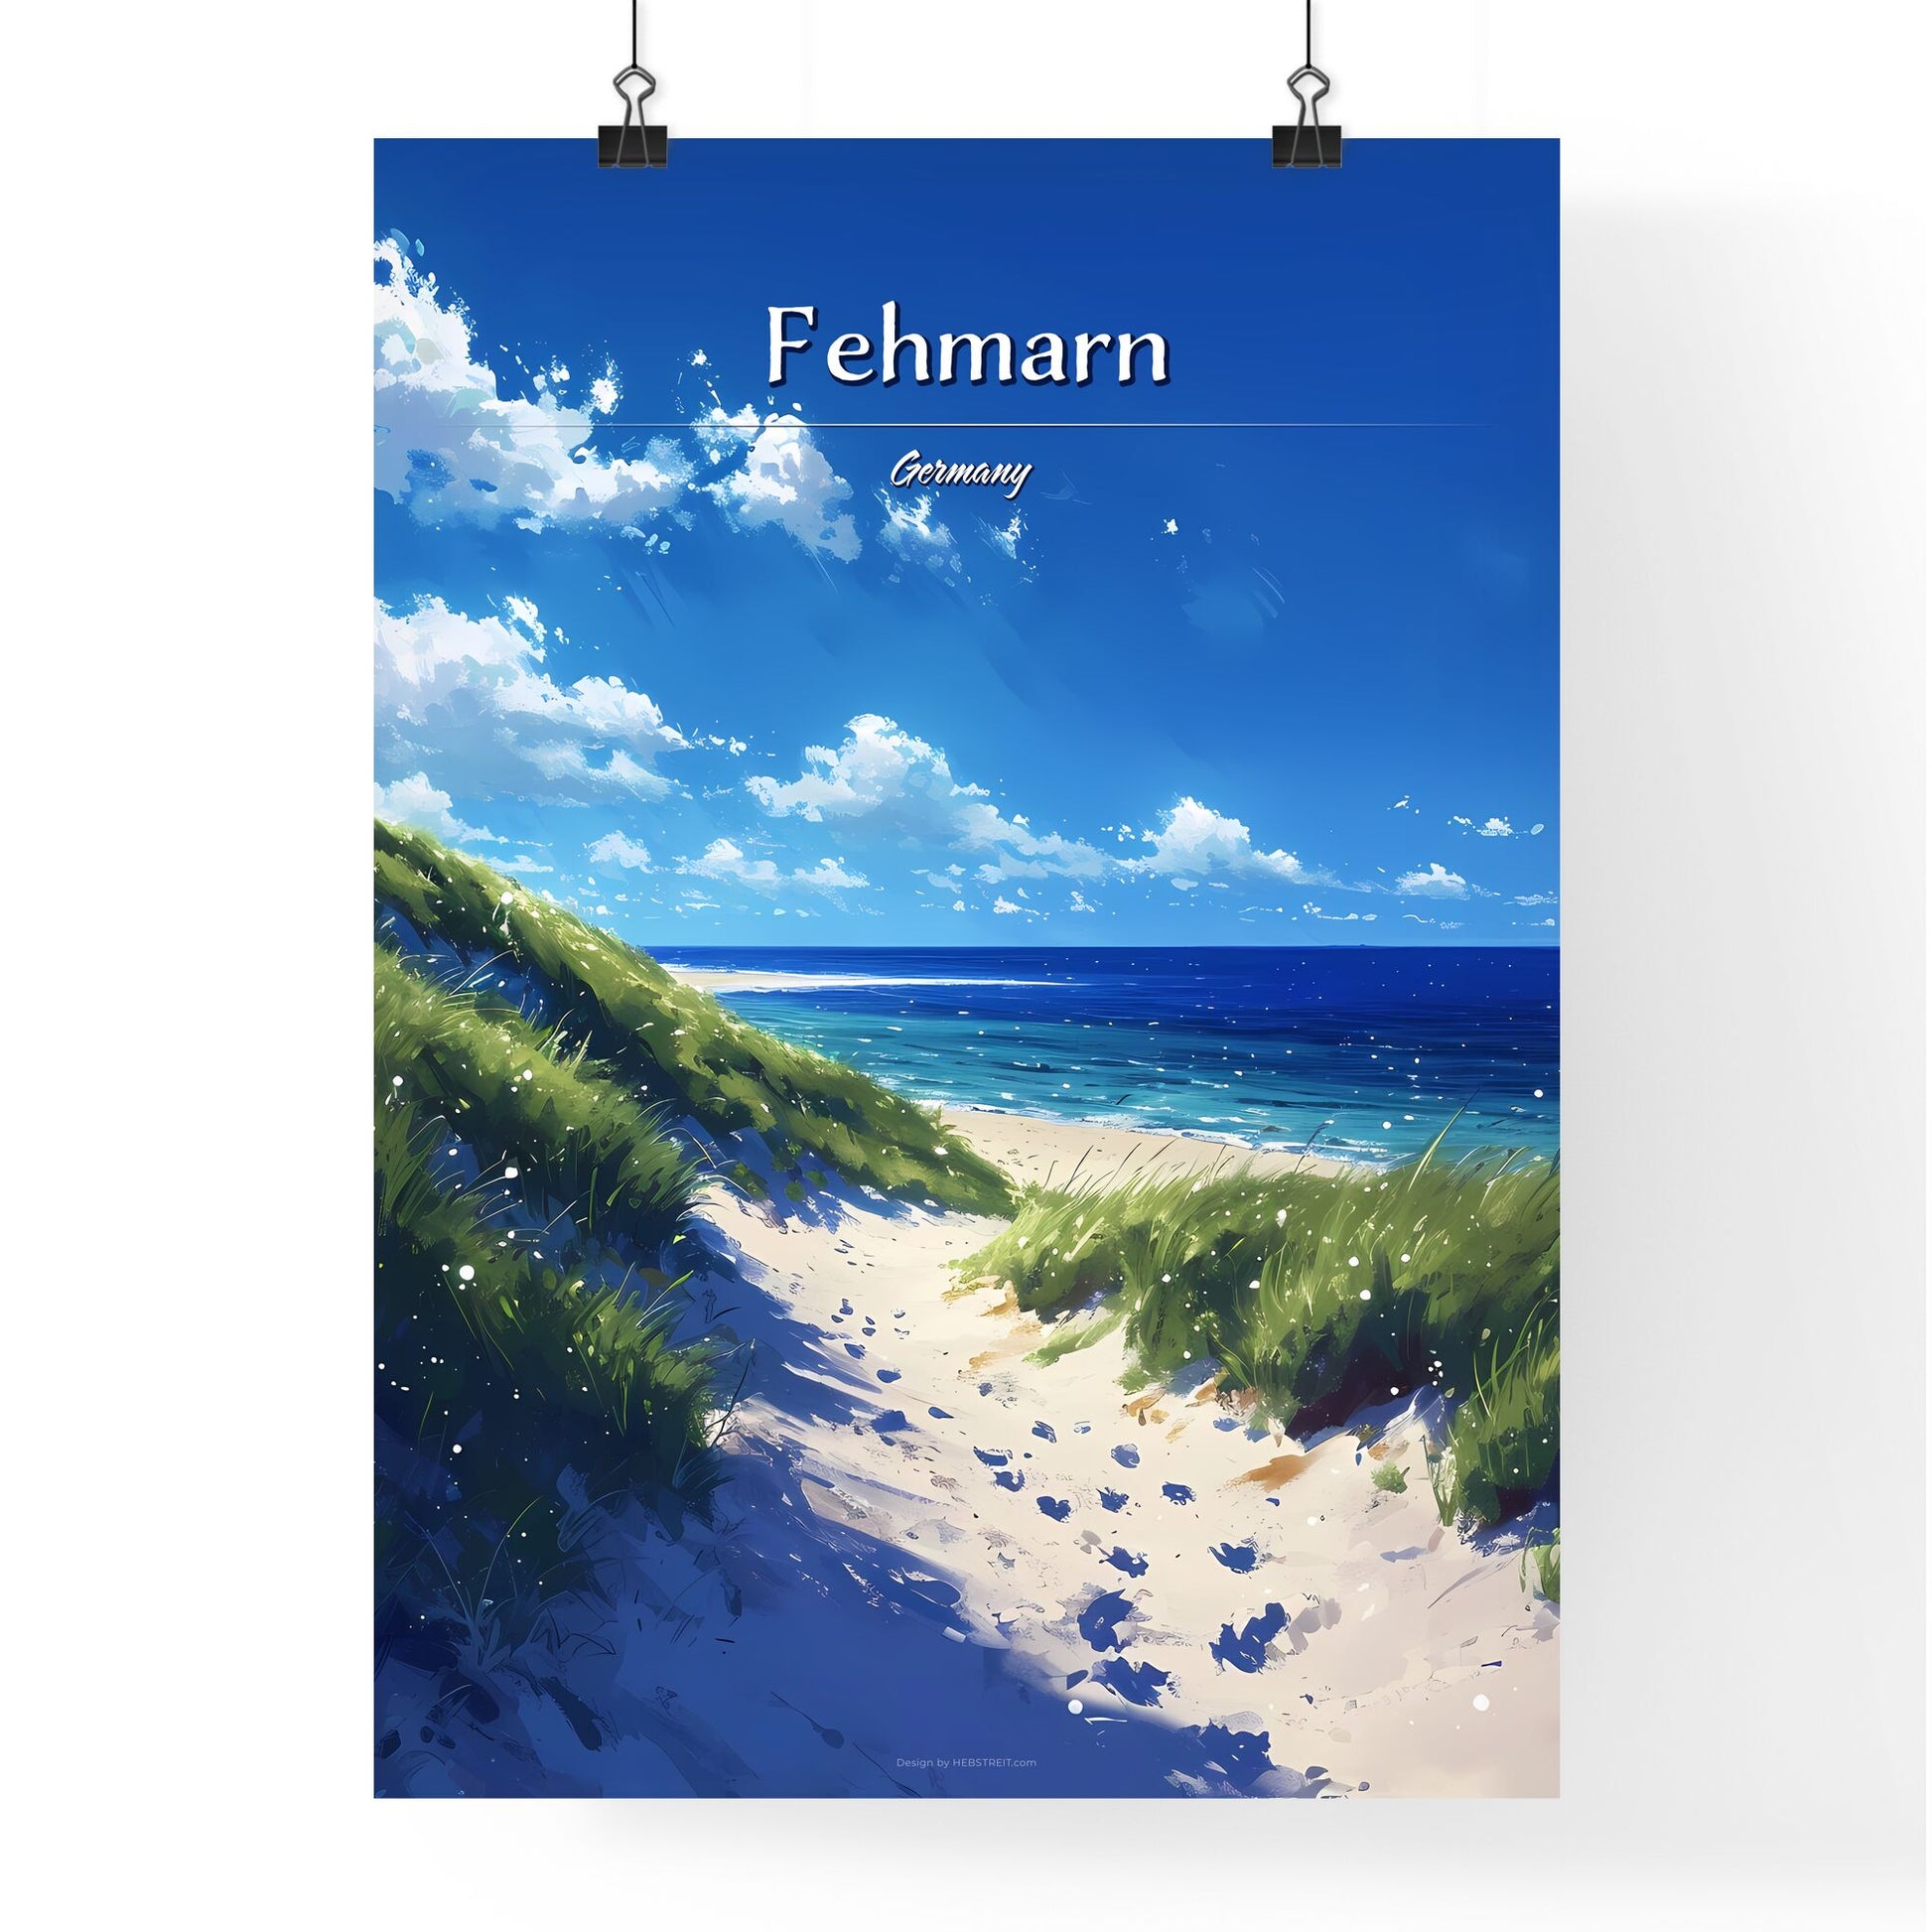 Fehmarn Südstrand, Germany (Baltic Sea) - Art print of a beach with grass and blue water Default Title